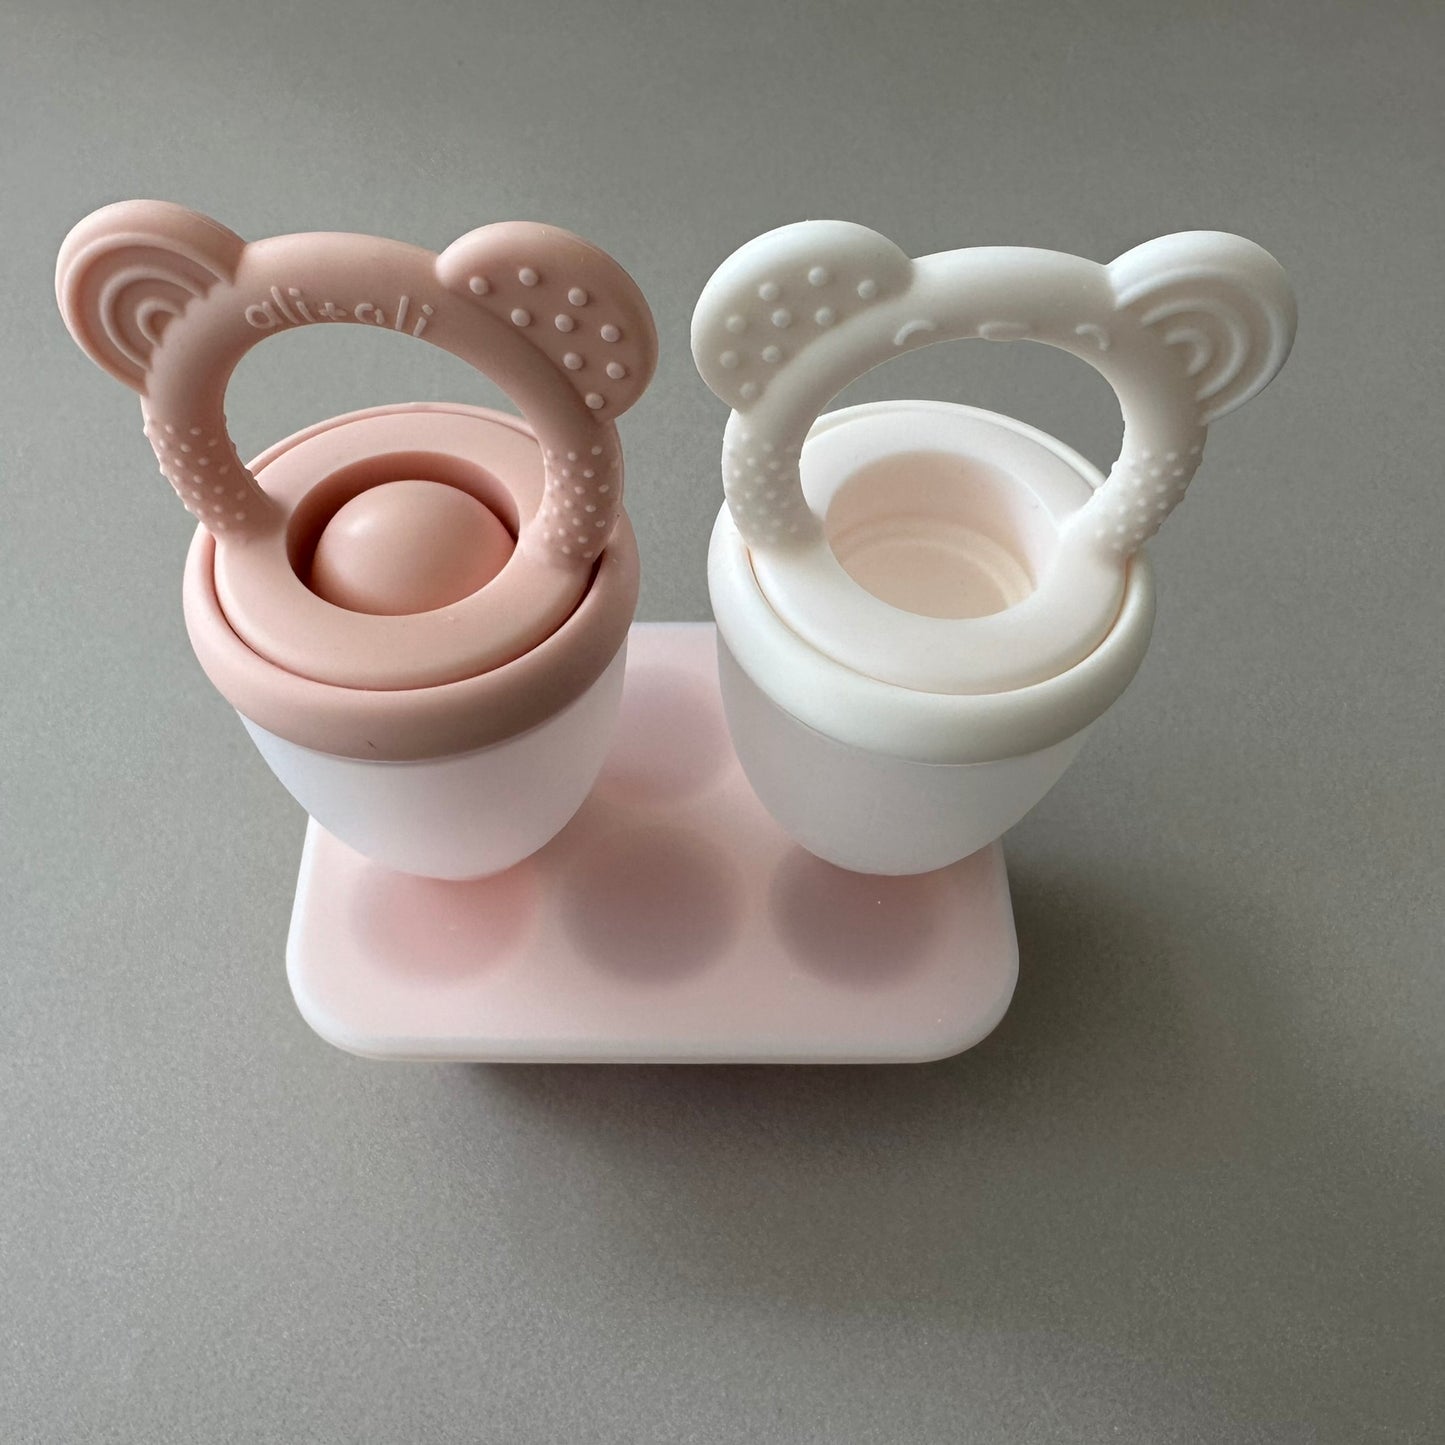 Food & Fruit Feeder Pacifier 3pc Set for Baby (Pink & White) with Freezer Tray